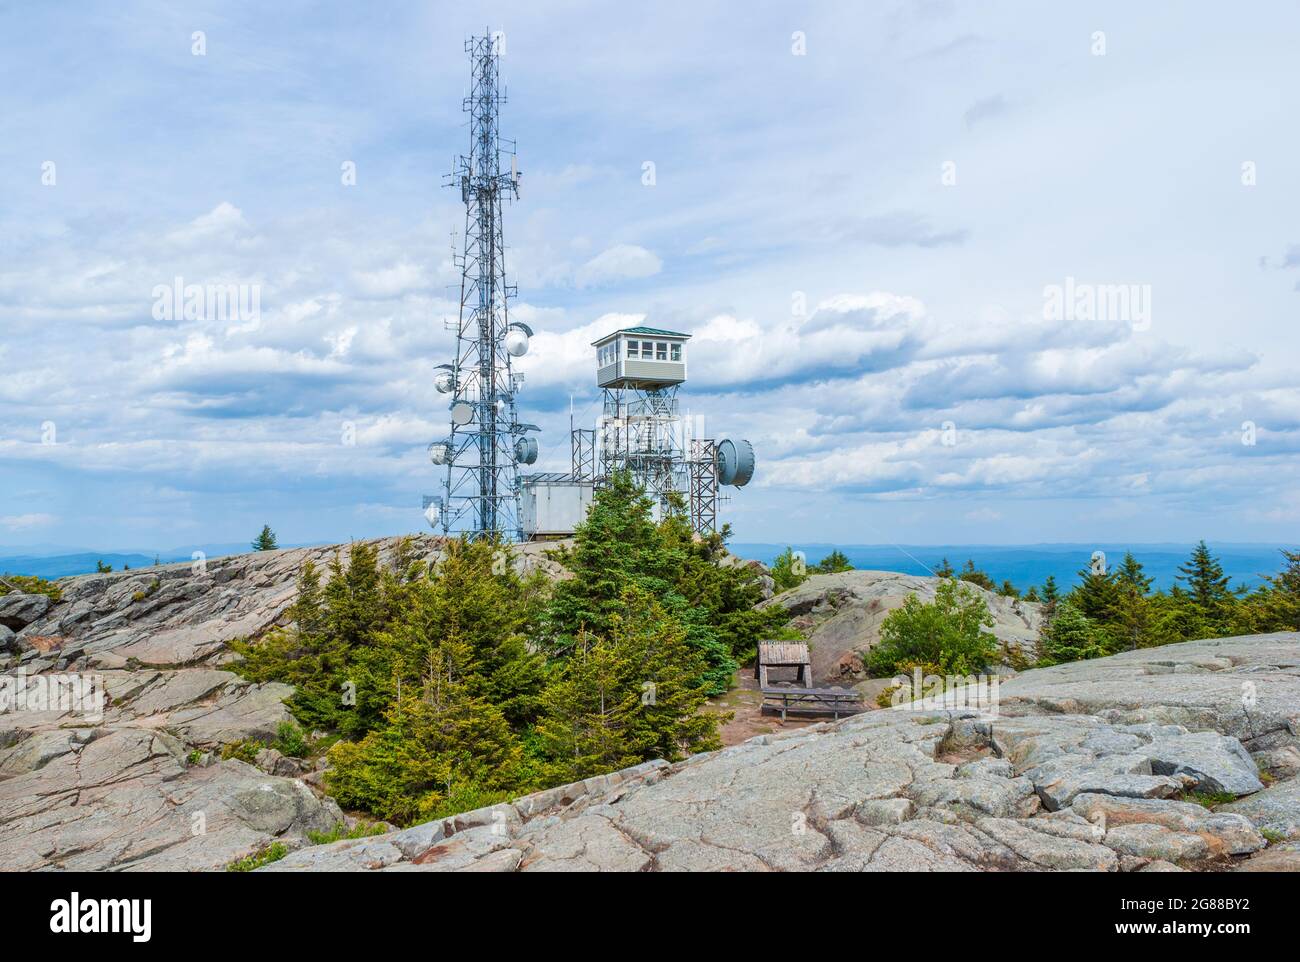 The fire tower on the summit of Mount Kearsarge, New Hampshire. Antennas on a radio repeater tower. Rocky granite outcrop and stunted spruce trees. Stock Photo